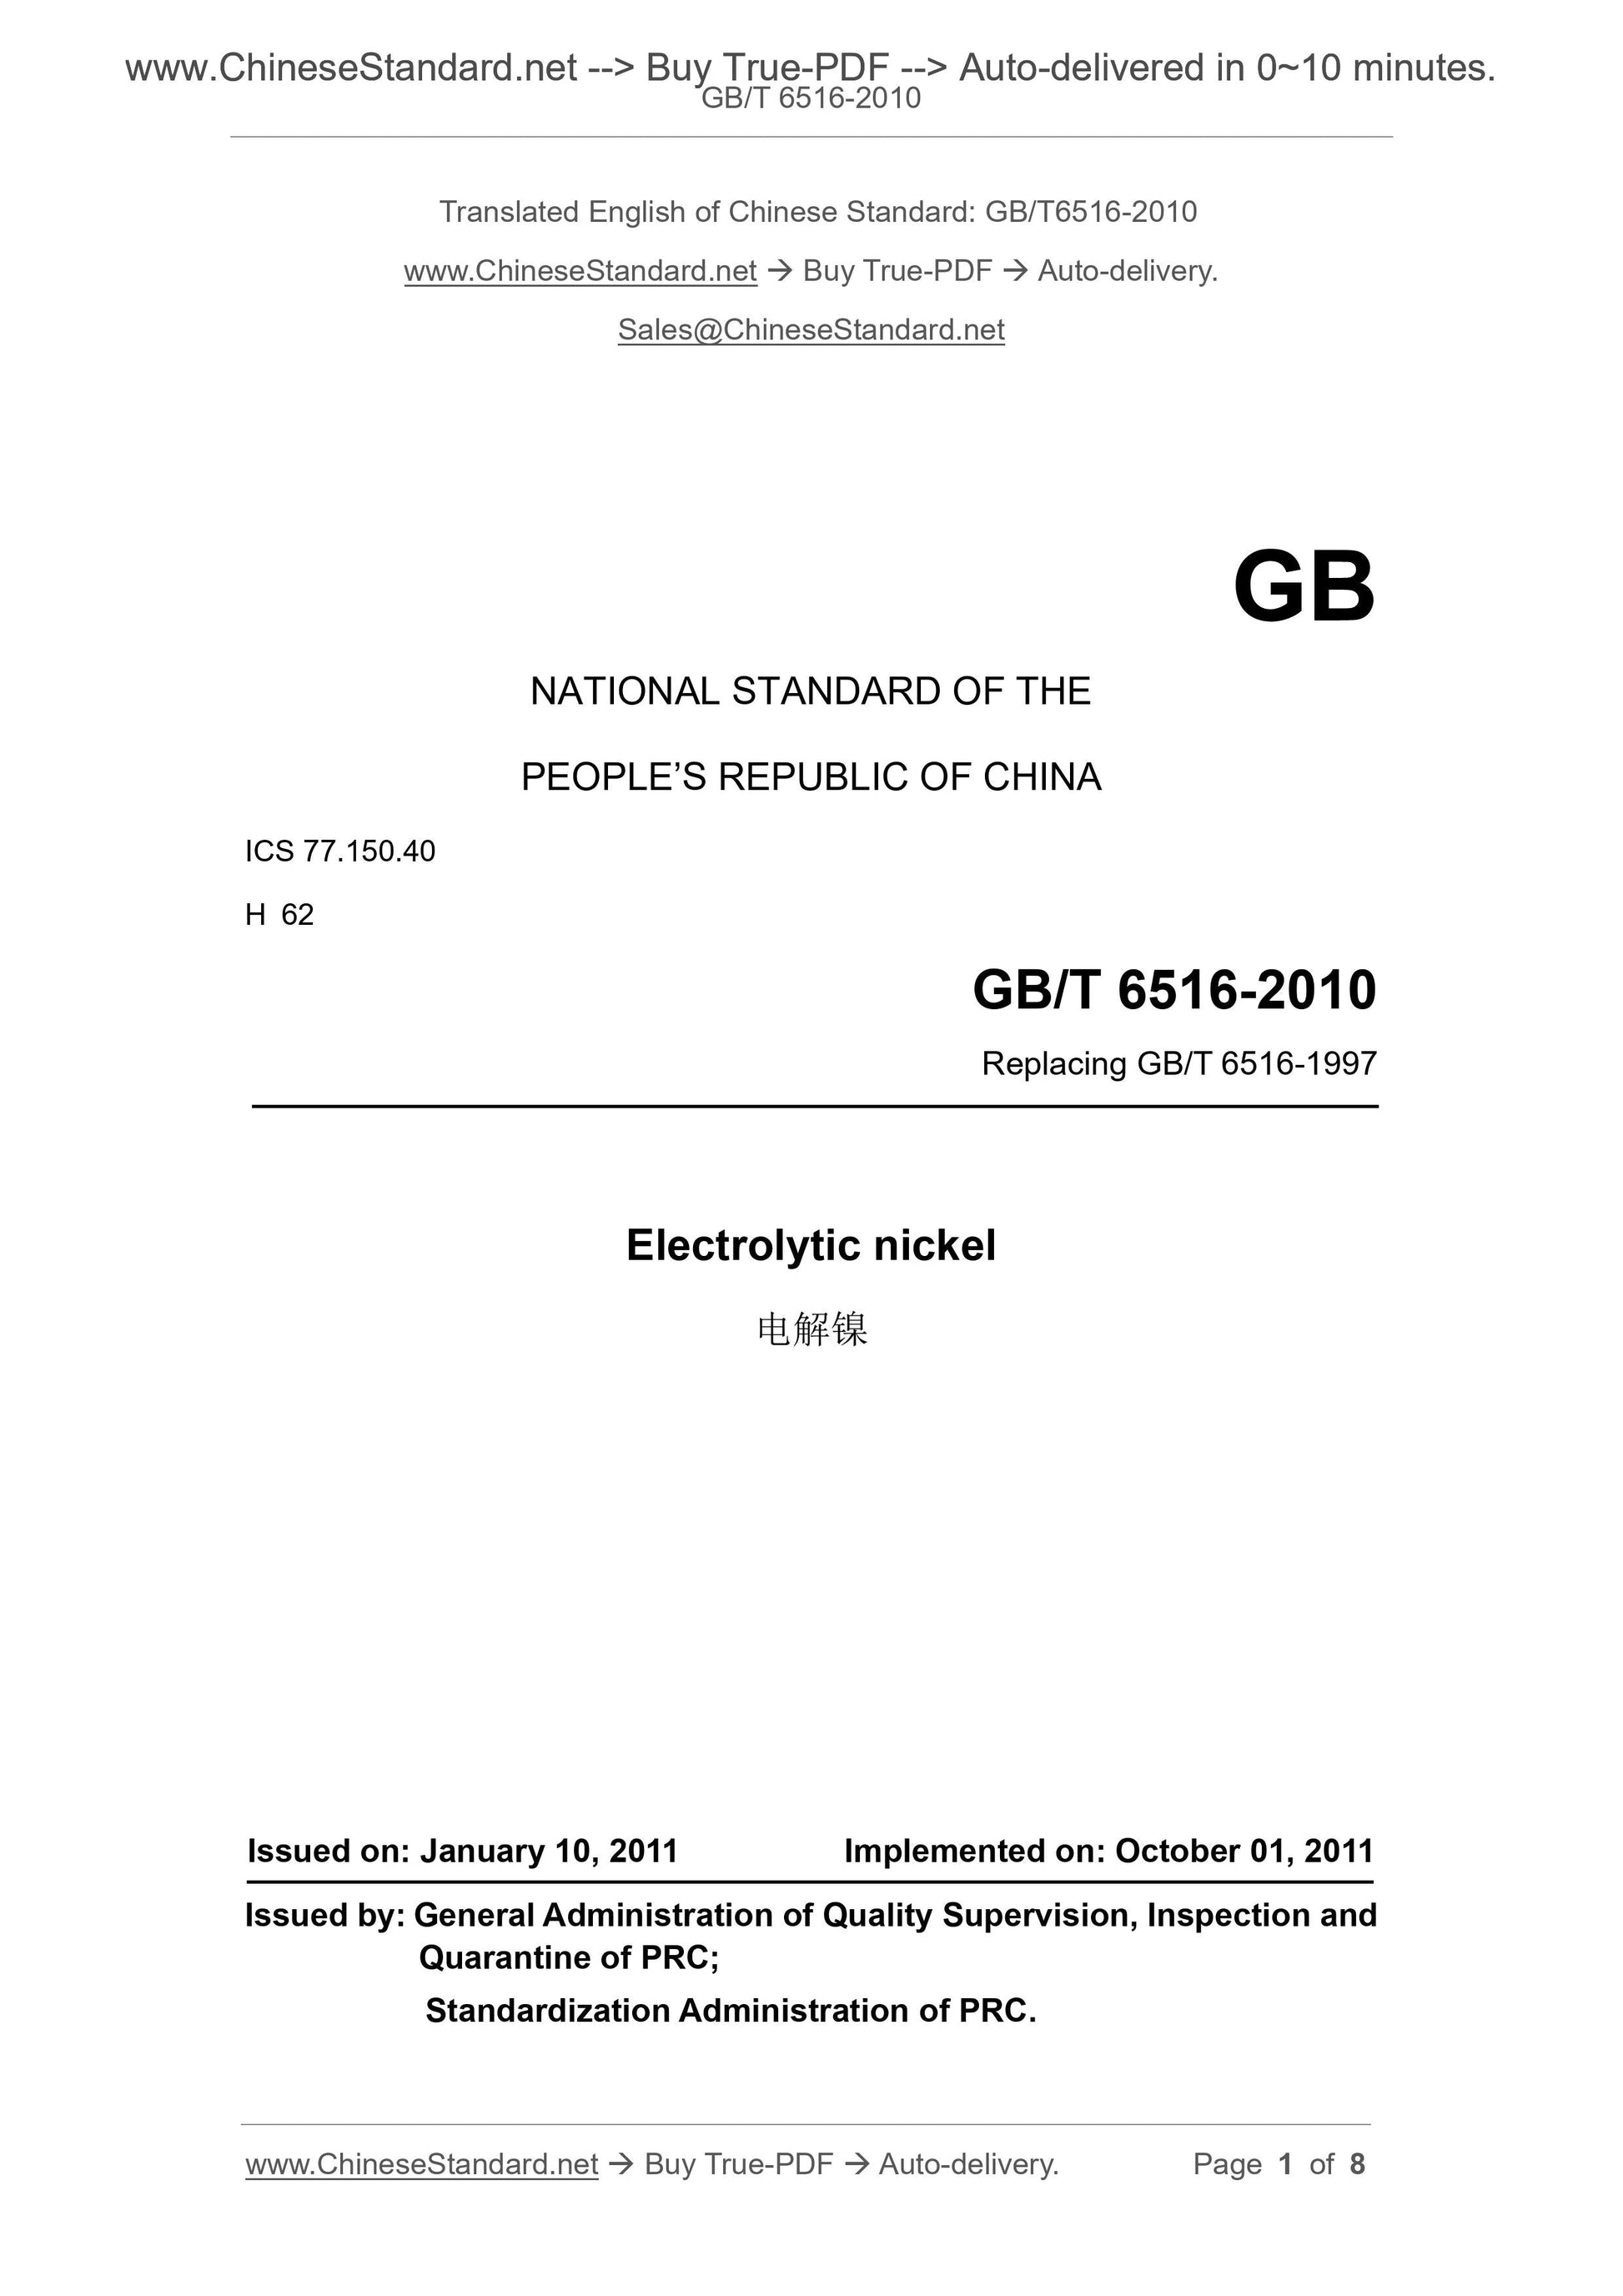 GB/T 6516-2010 Page 1